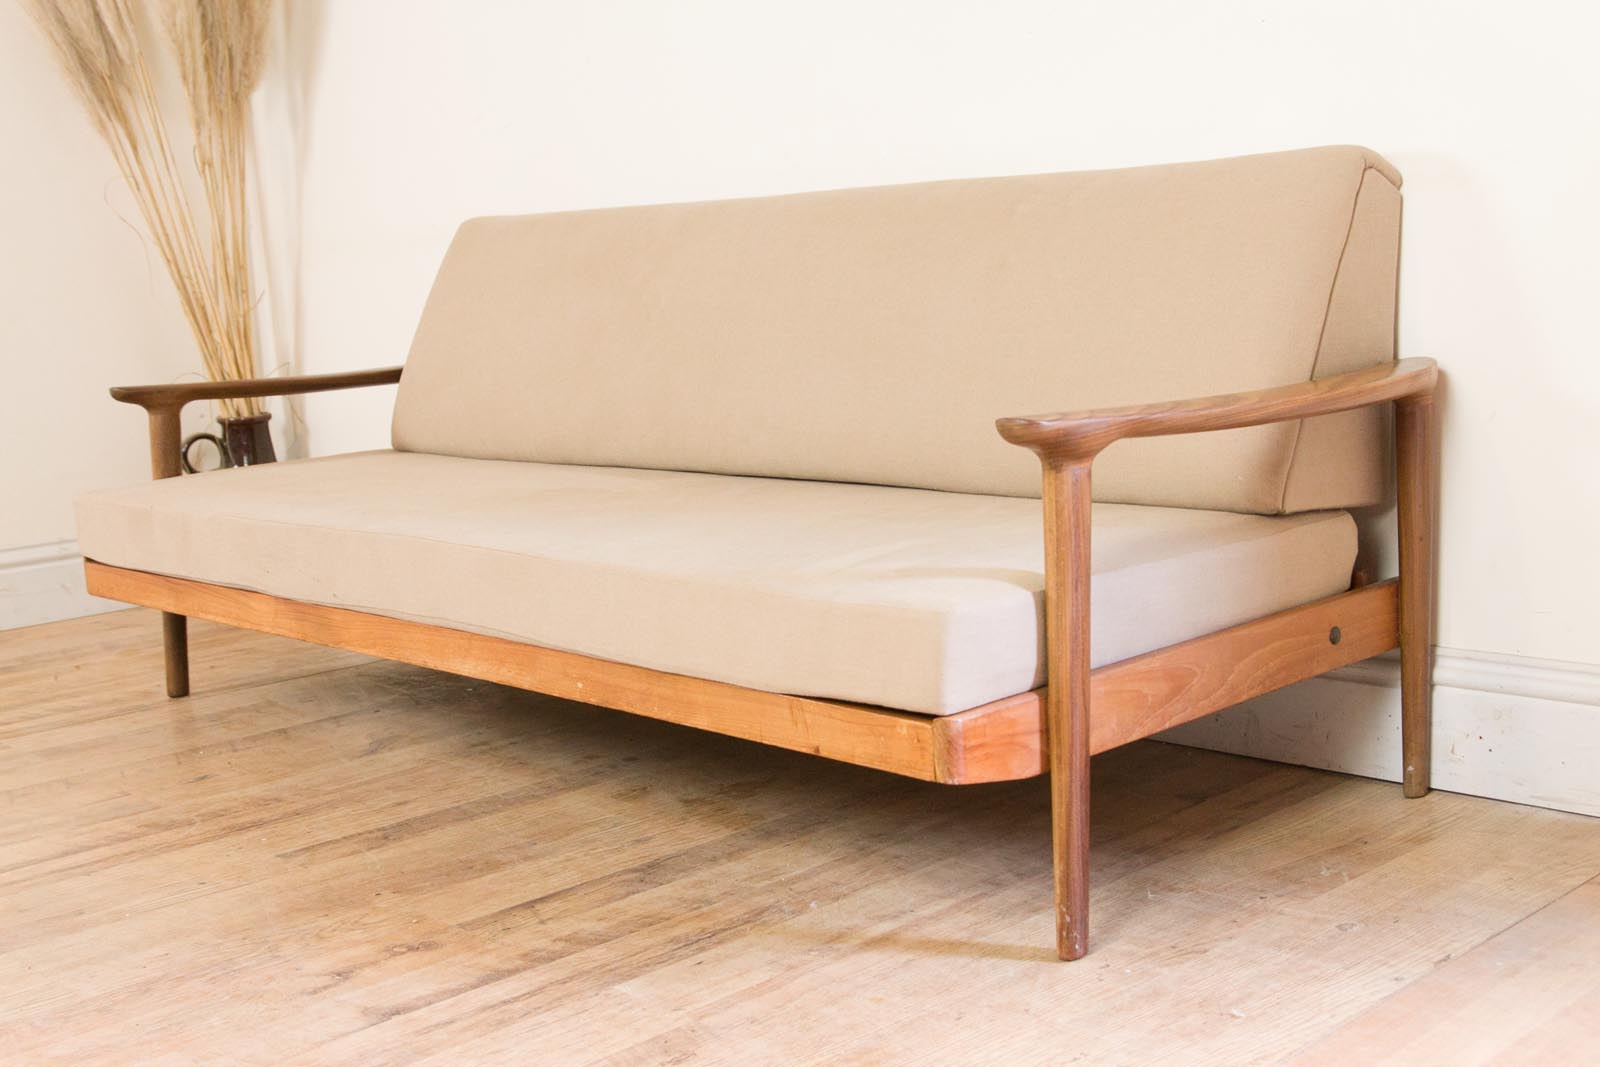 guy rogers sofa bed